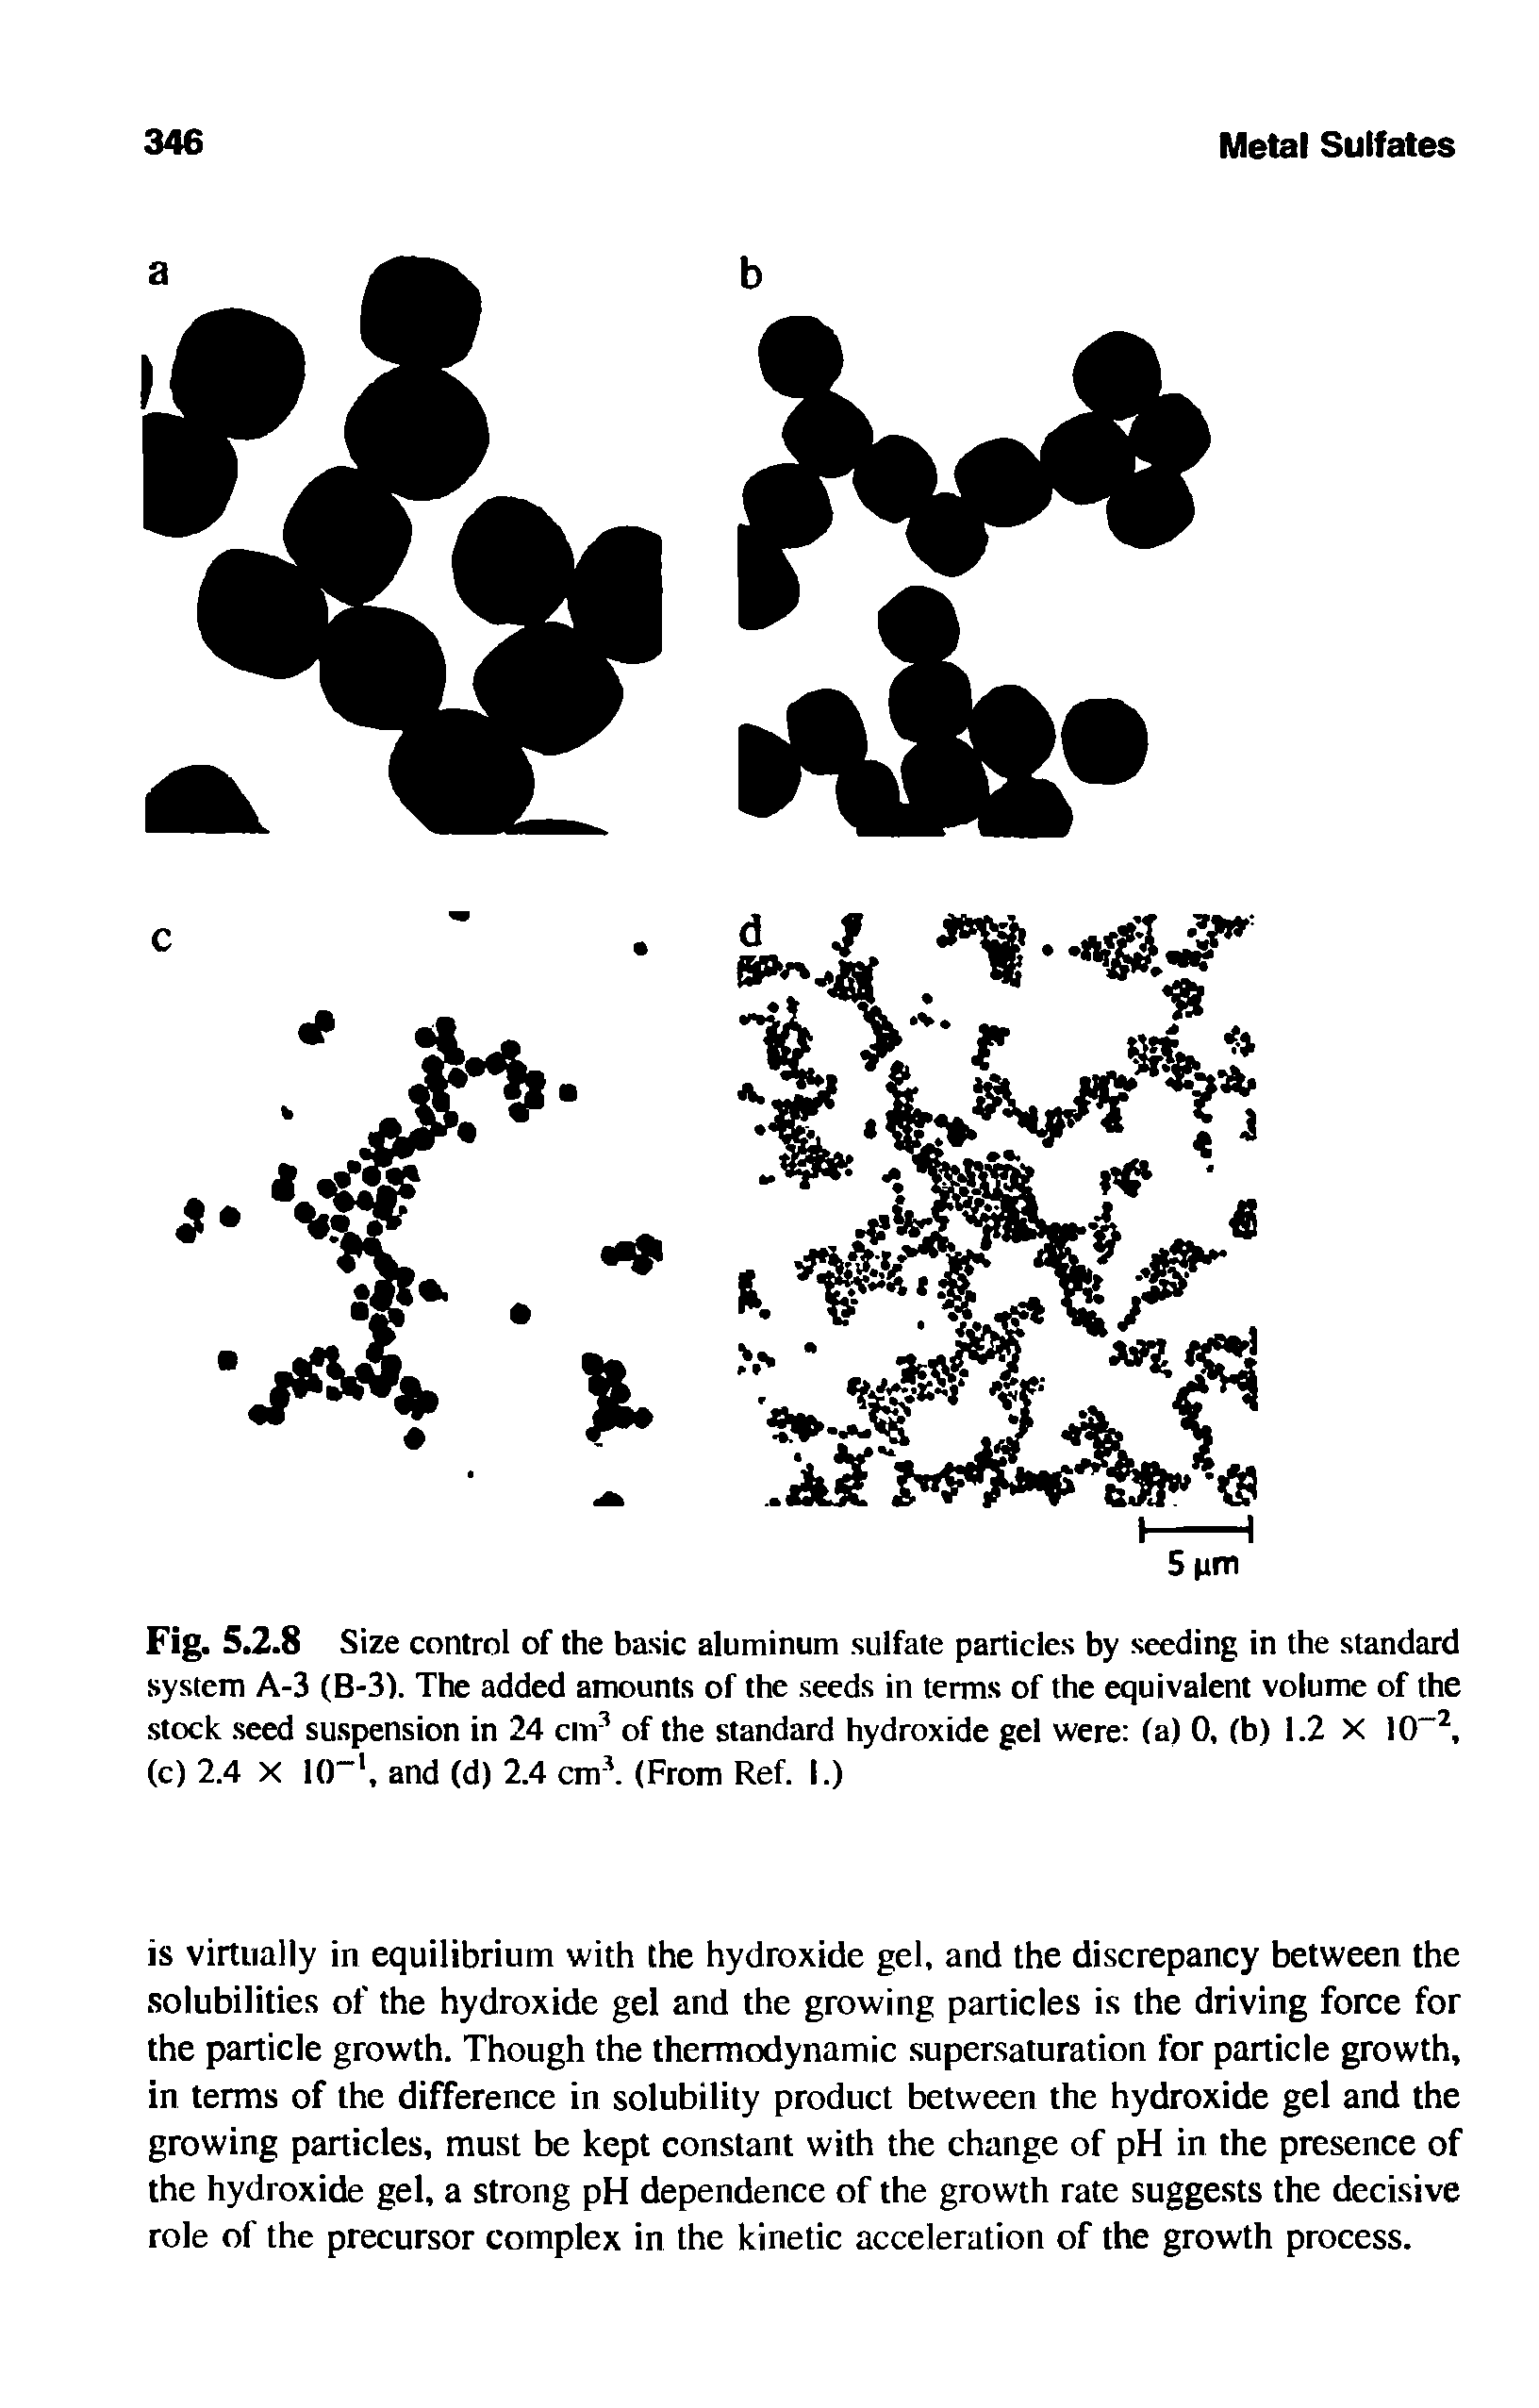 Fig. 5.2.8 Size control of the basic aluminum sulfate particles by seeding in the standard system A-3 (B-3). The added amounts of the seeds in terms of the equivalent volume of the stock seed suspension in 24 cm3 of the standard hydroxide gel were (a) 0, (b) 1.2 X 10 2, (c) 2.4 X 10-1, and (d) 2.4 cm3. (From Ref. I.)...